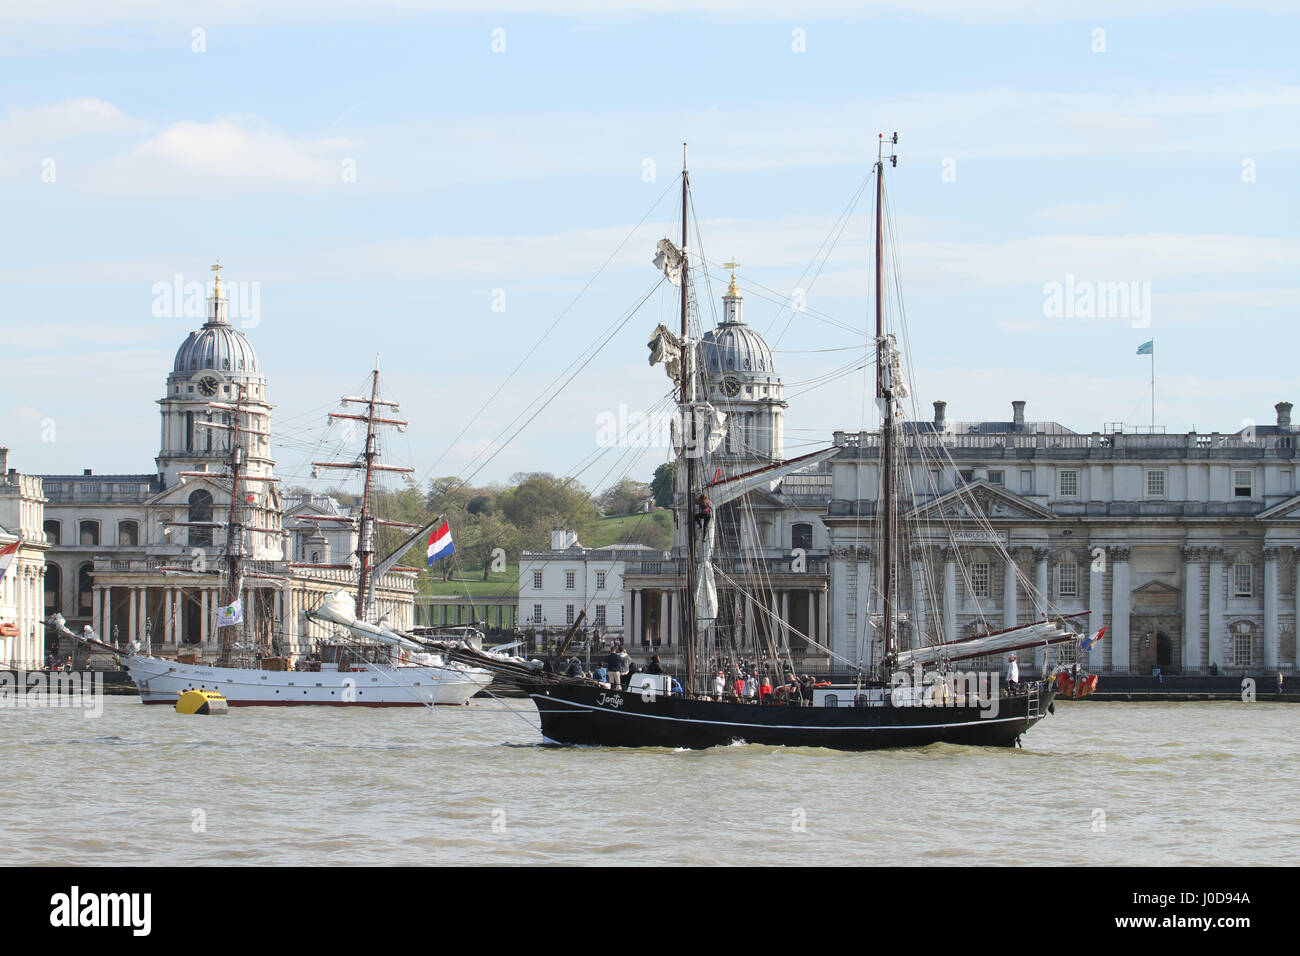 London, UK. 12th Apr, 2017. London, United Kingdom - April 12: The Jantye sails past the Maritime Greenwich UNESCO World Heritage Site ahead of the 2017 Tall Ships Regatta. Around 40 Tall Ships are scheduled to sail the river Thames to Greenwich, marking the 150th anniversary of the Canadian Confederation. Credit: David Mbiyu/Alamy Live News Stock Photo